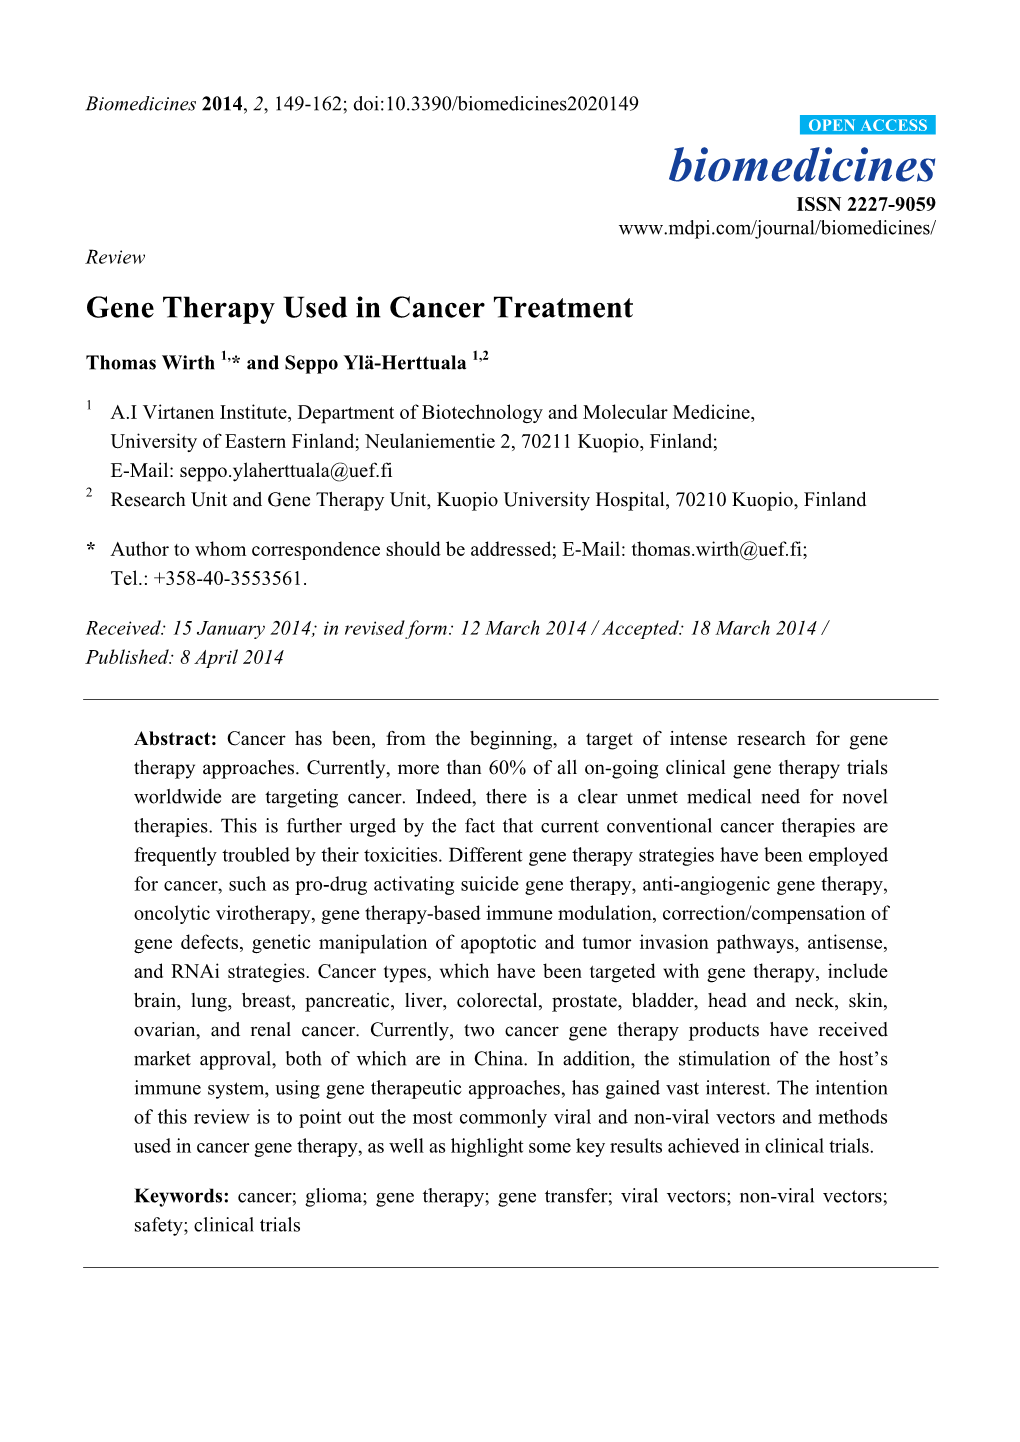 Gene Therapy Used in Cancer Treatment